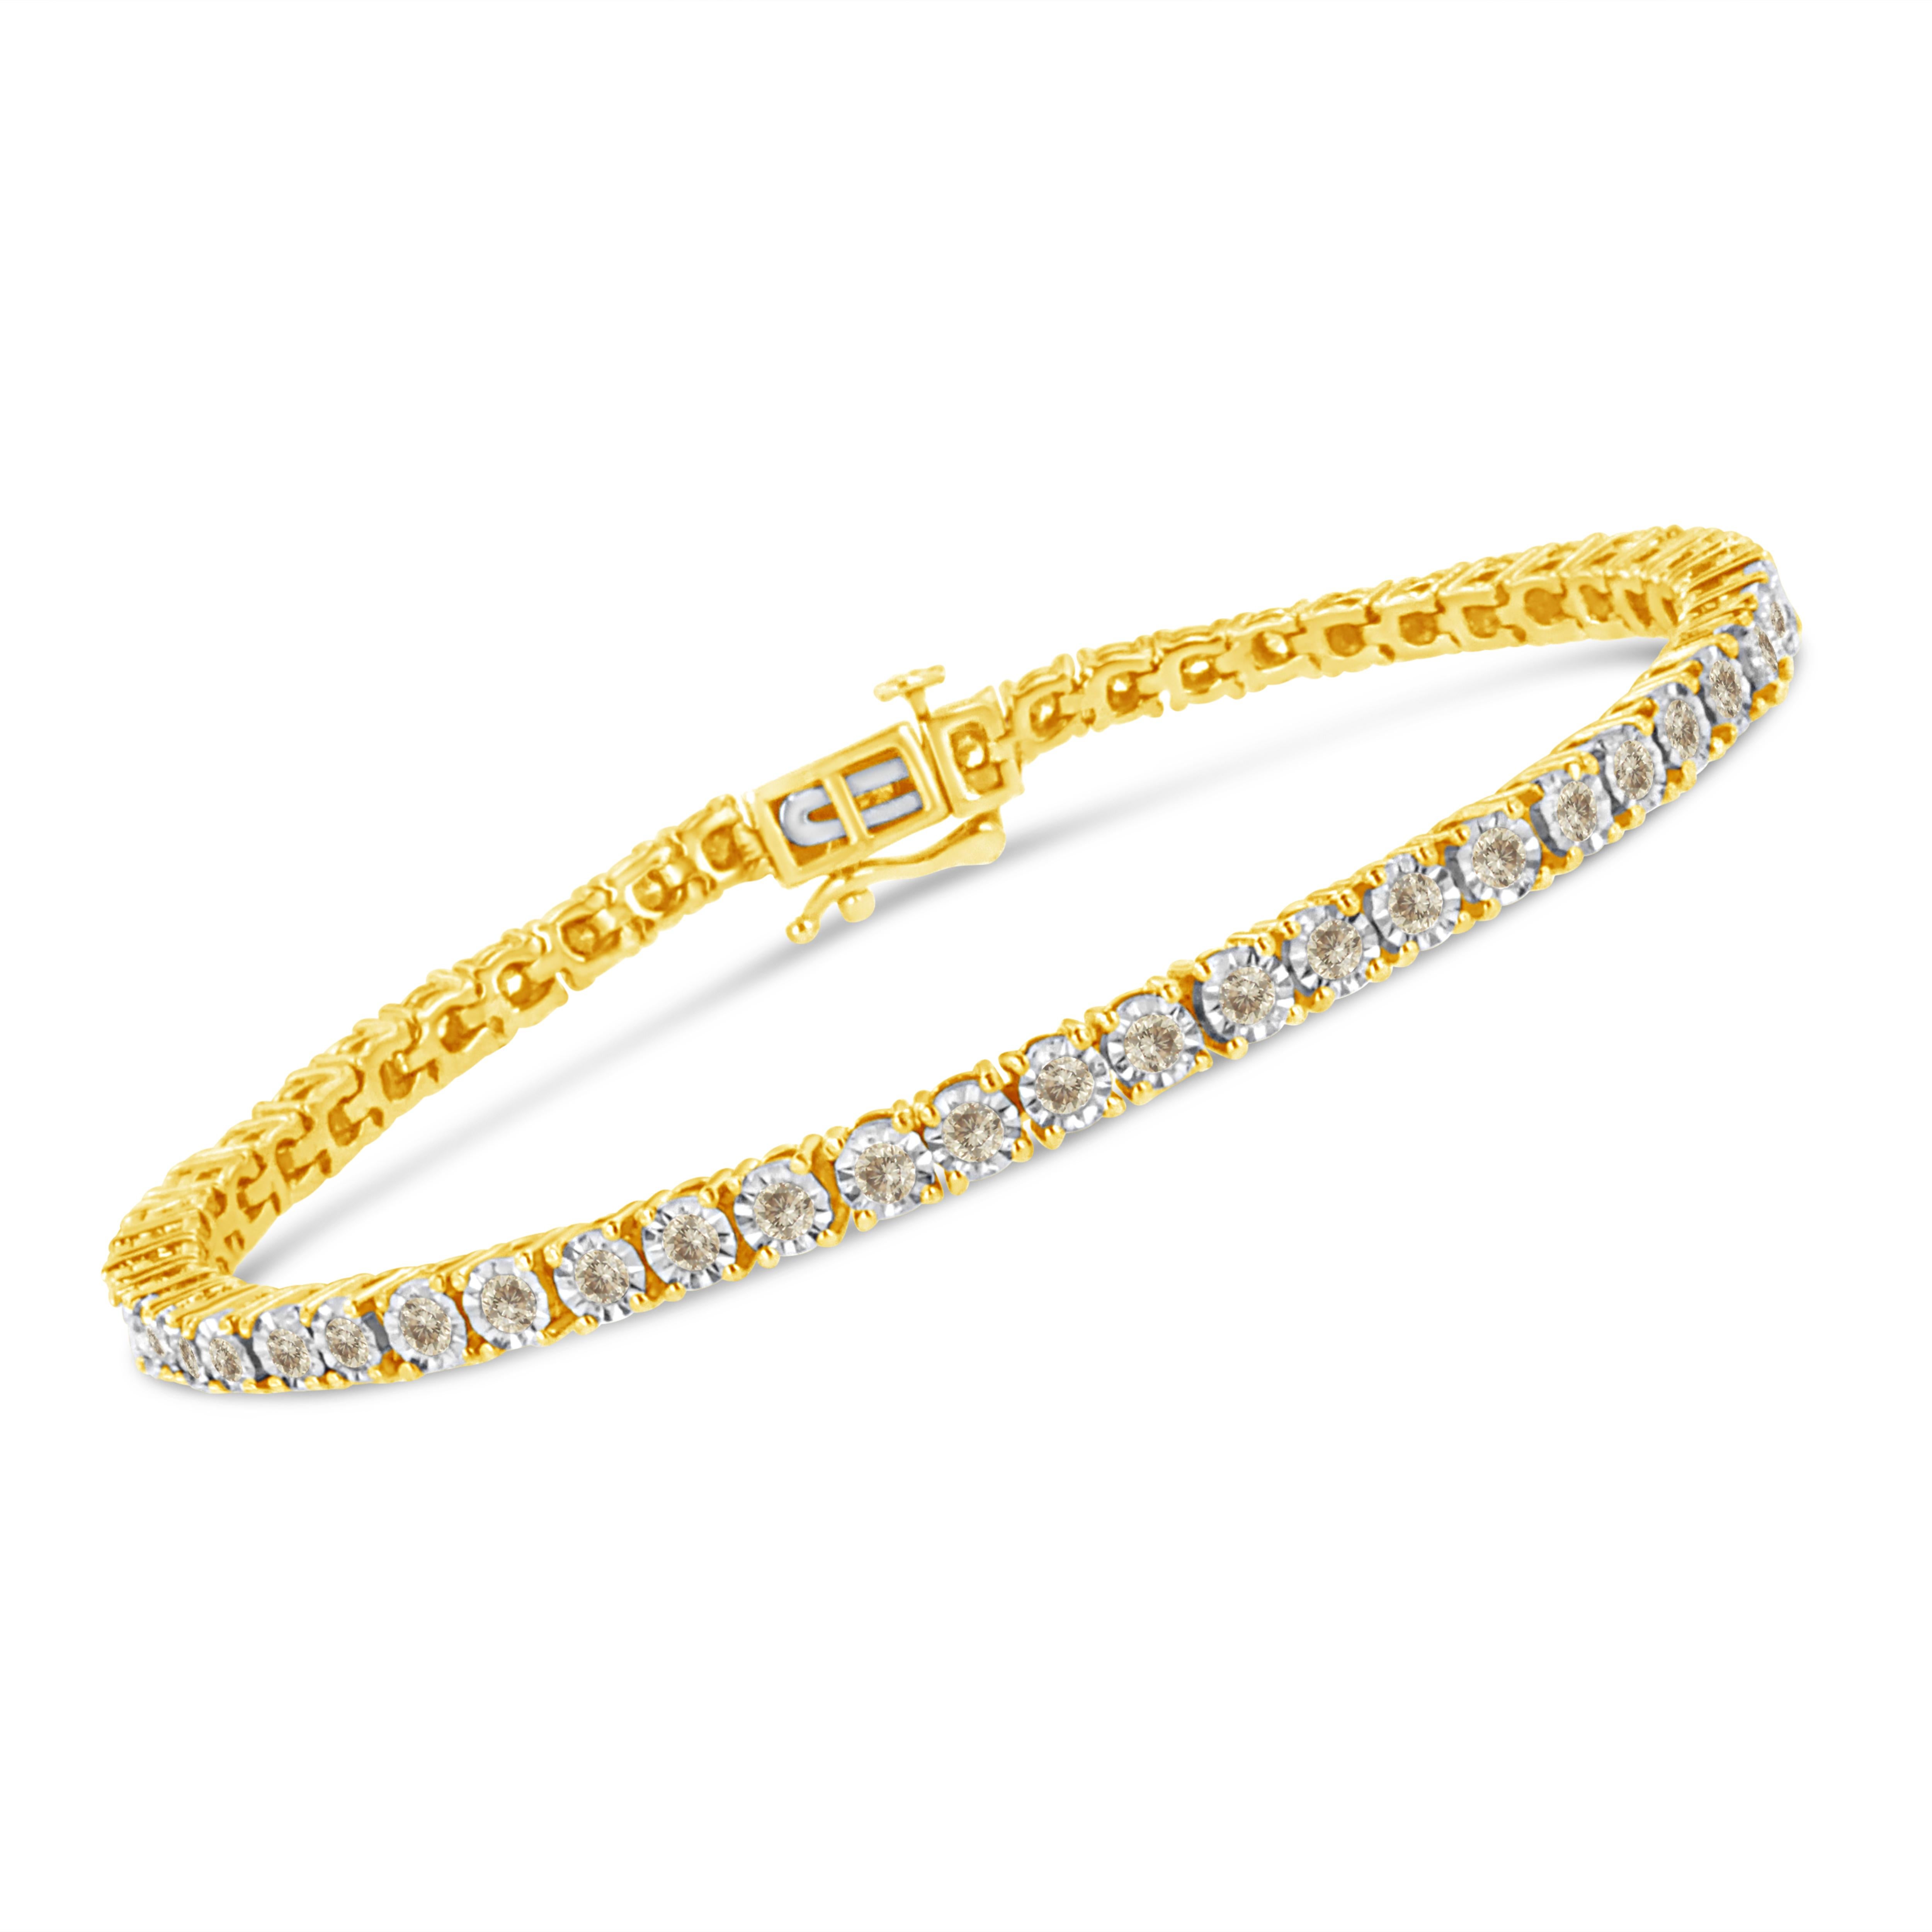 This tennis bracelet is a classic and will look glamorous on your wrist! This gorgeous piece is crafted from warm weaves of 14k yellow gold plated .925 sterling silver. Boasting an impressive a total diamond weight of 3 cttw, this piece is set with